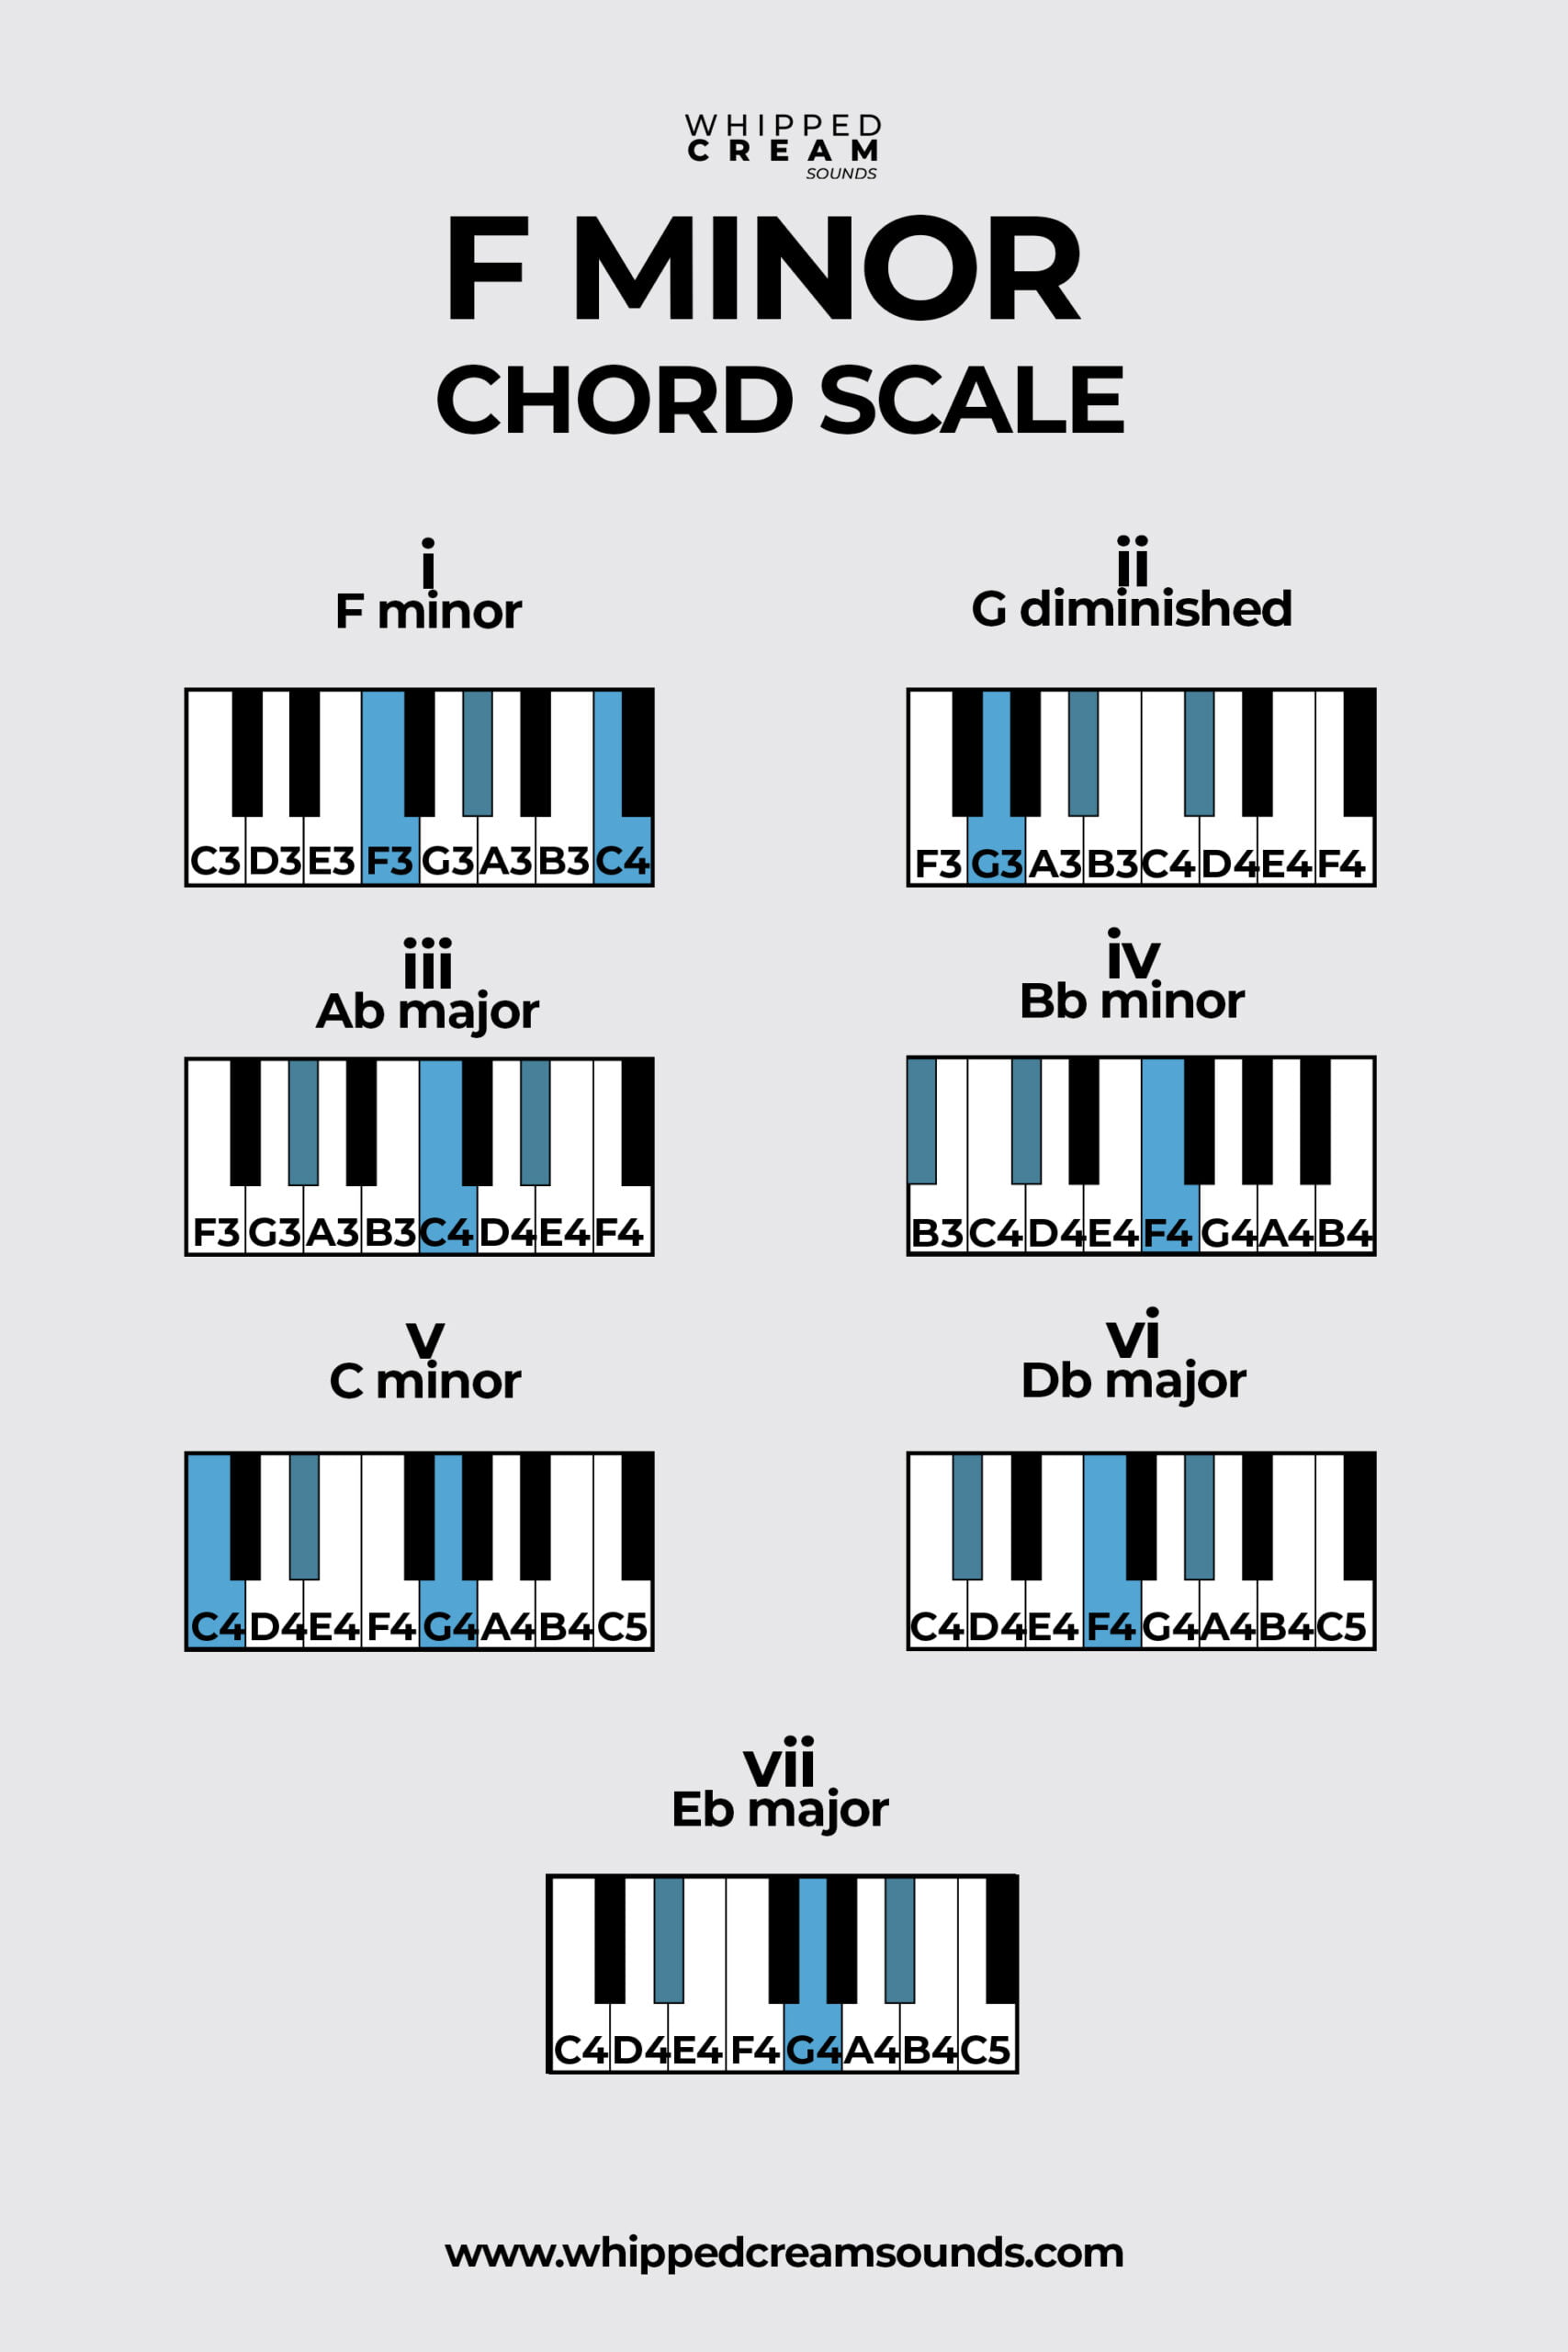 F Minor Chord Scale, Chords in The Key of F Minor